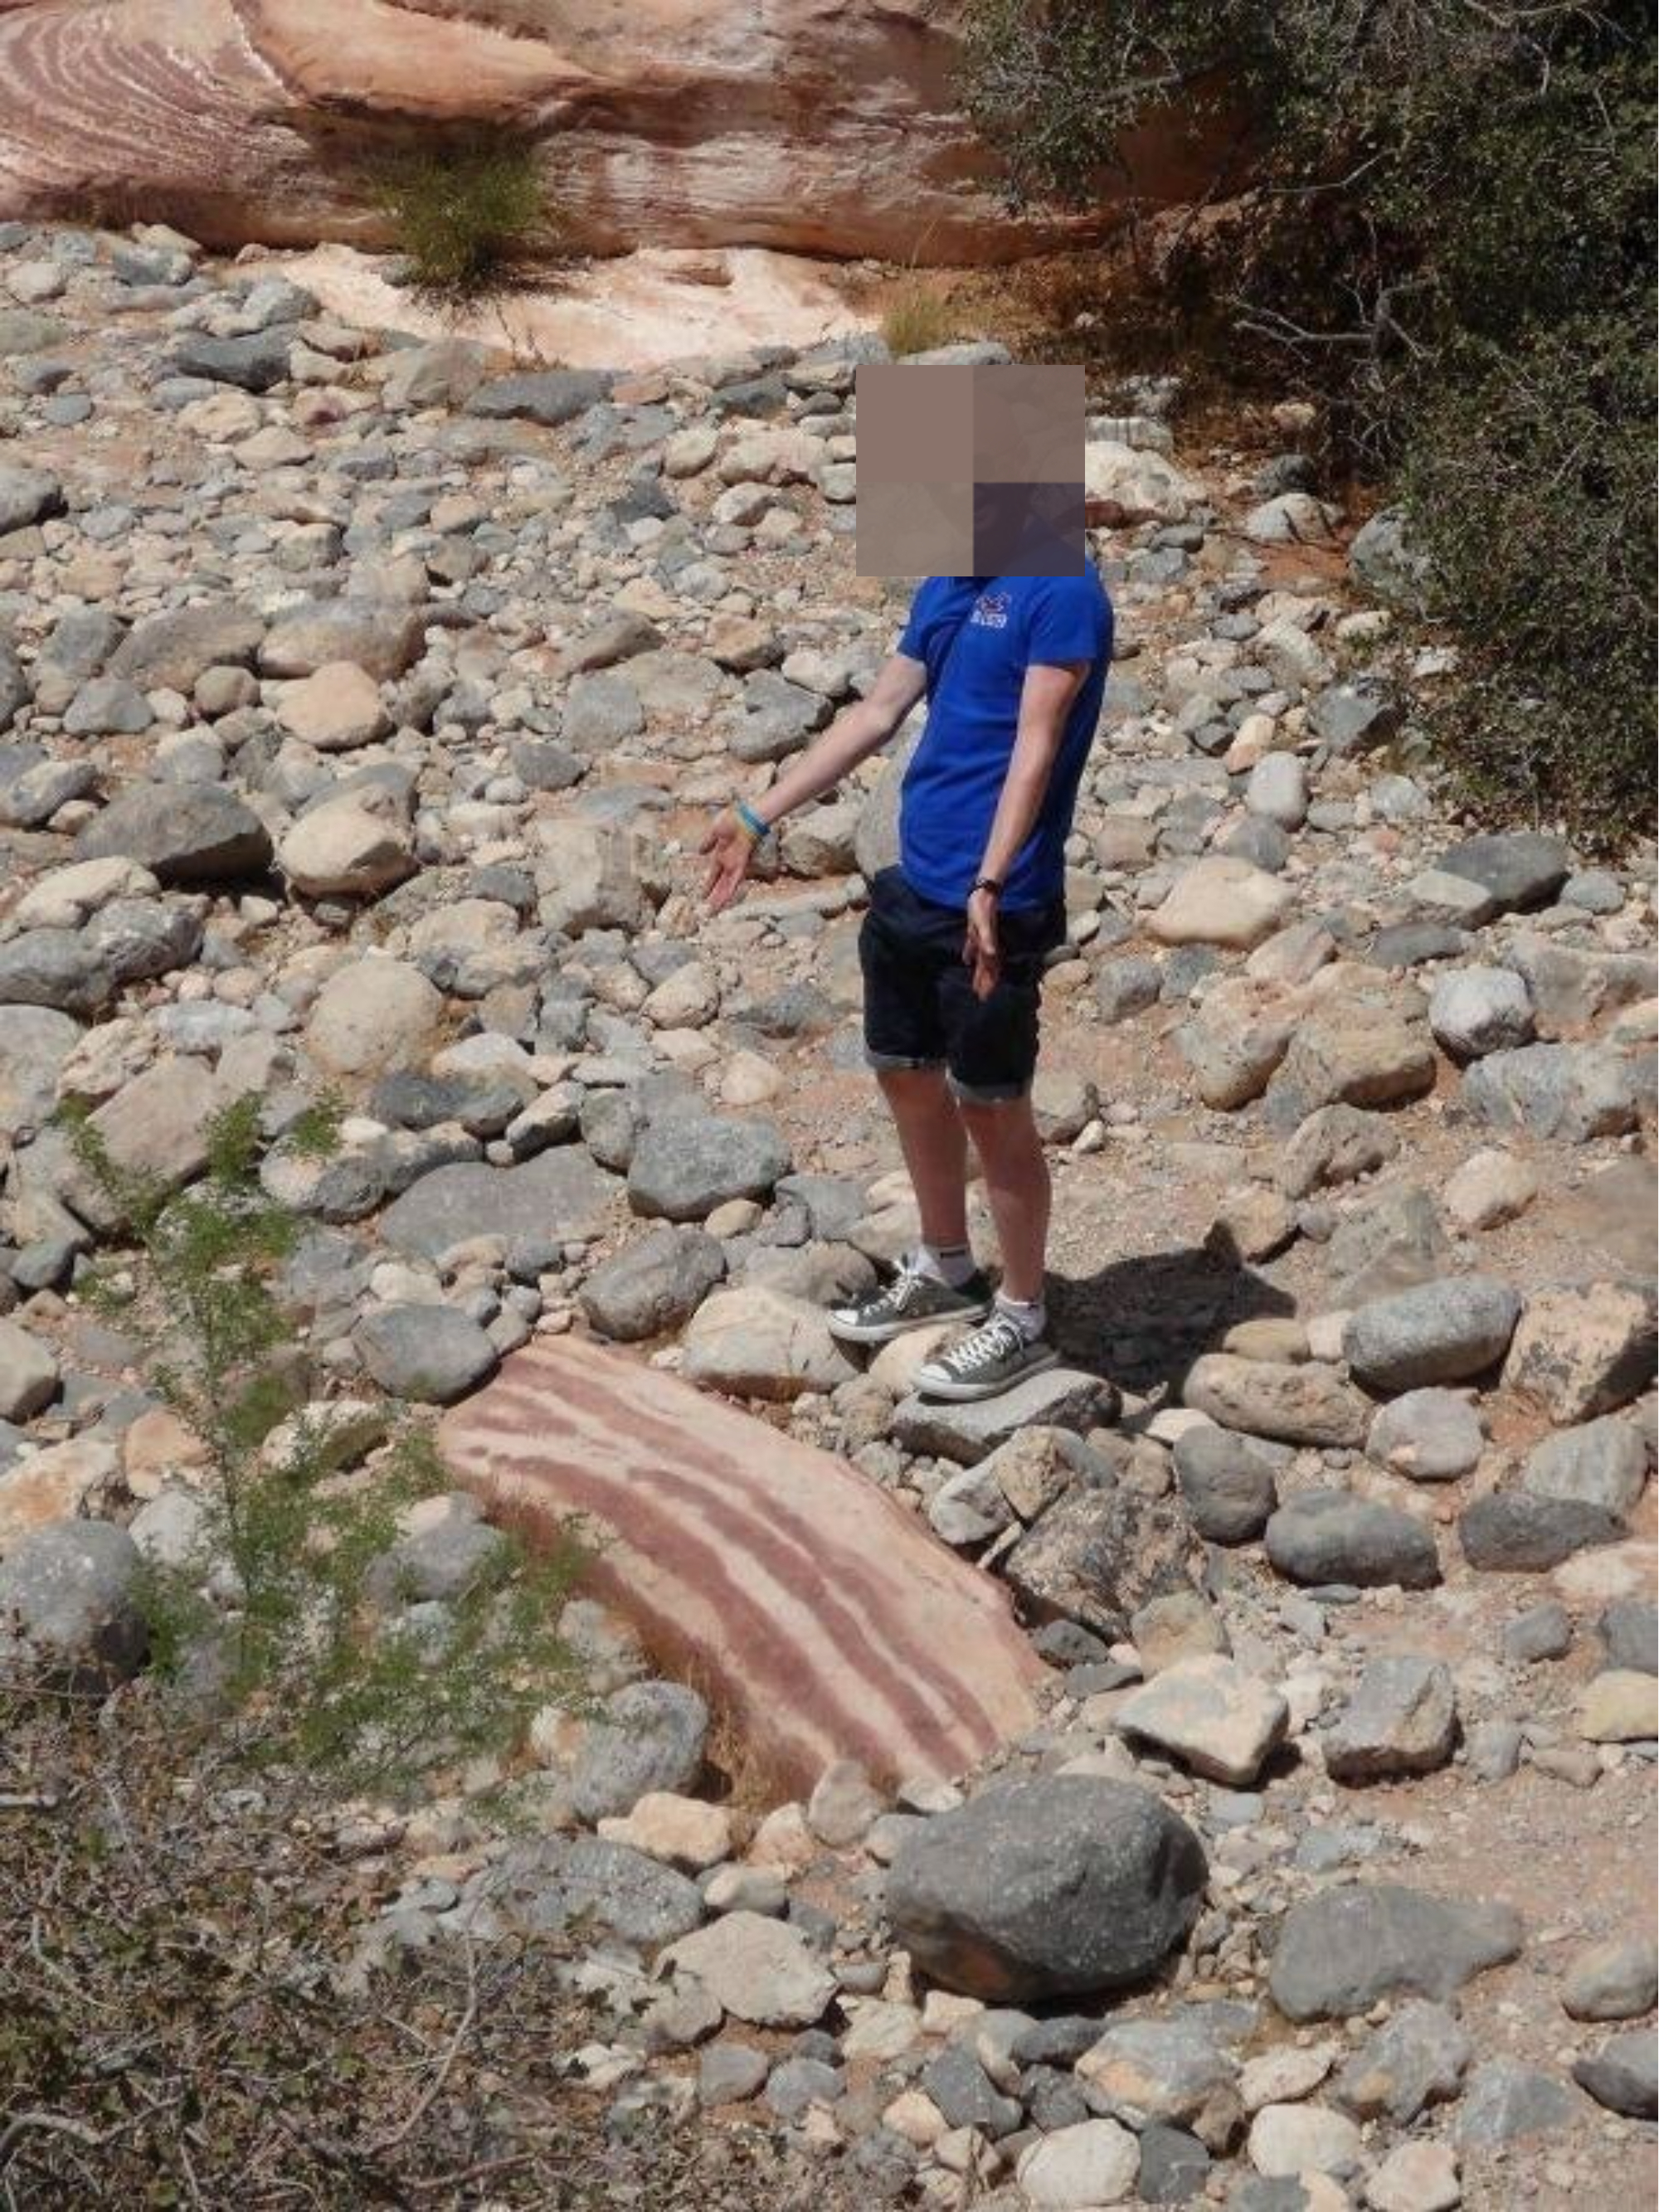 someone pointing to a rock that looks like uncooked bacon